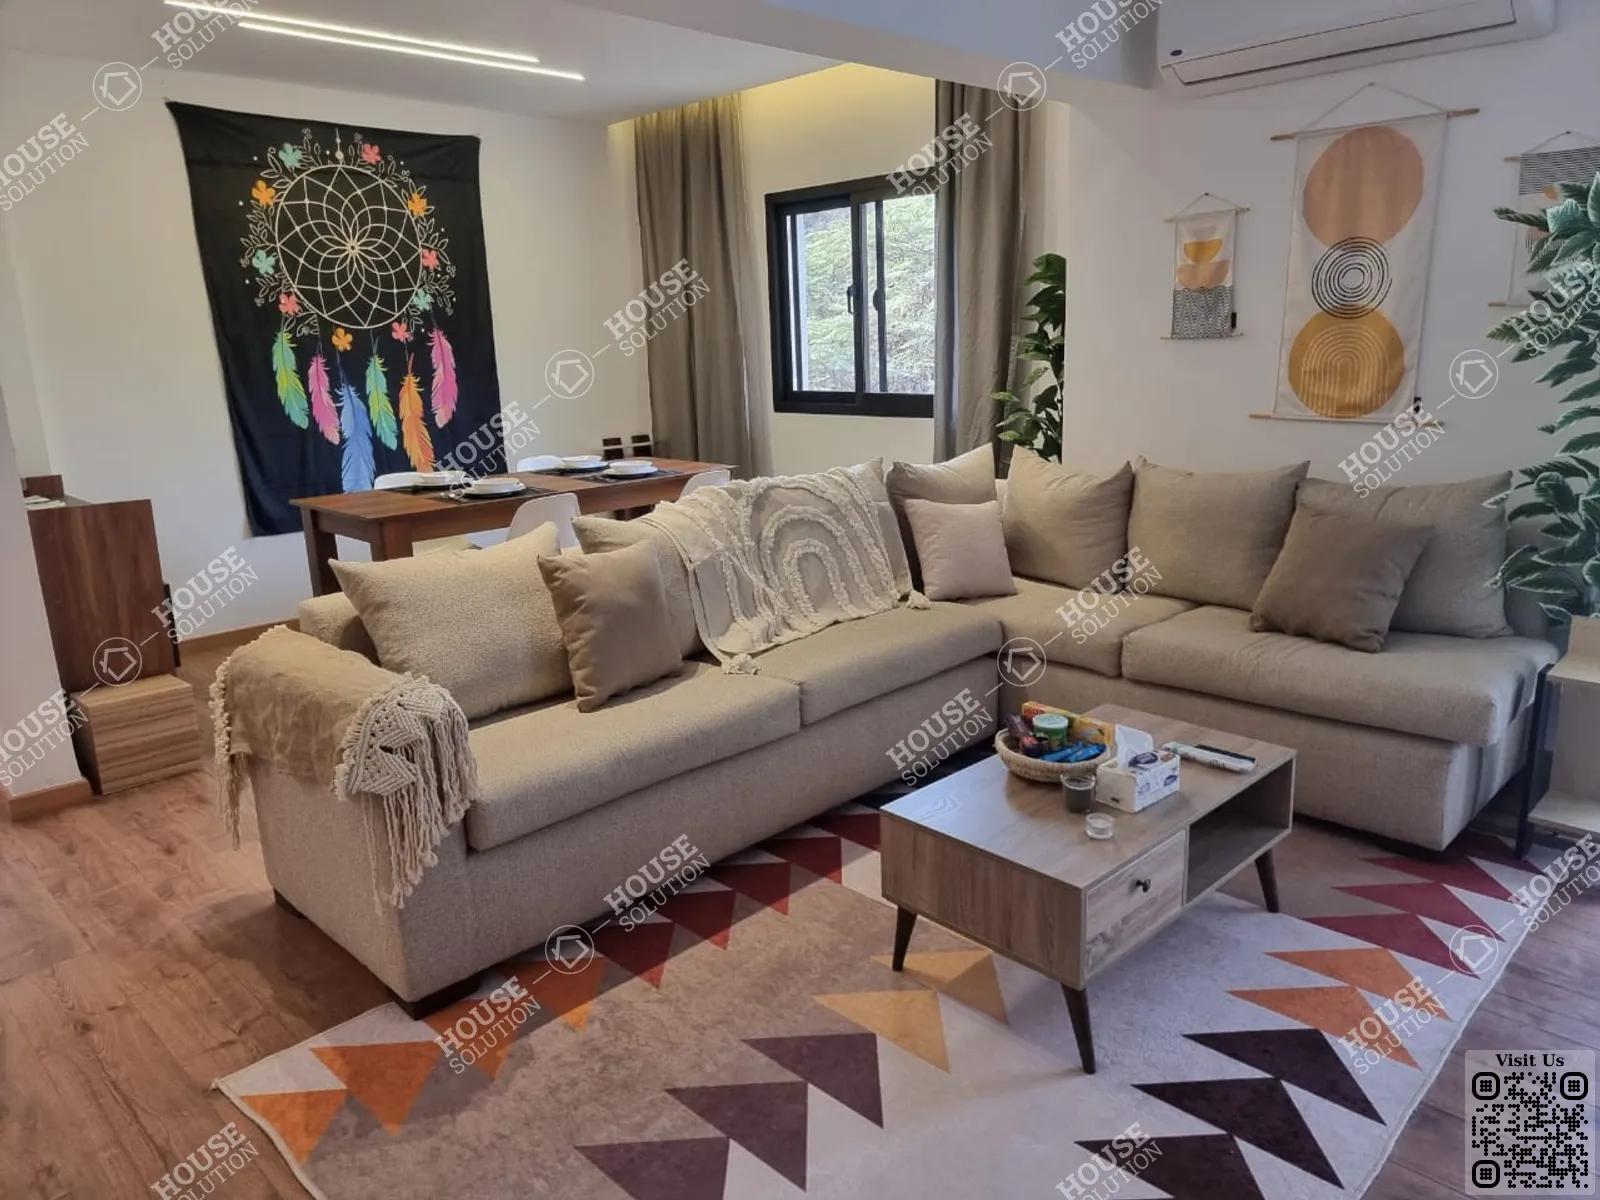 RECEPTION  @ Apartments For Rent In Maadi Maadi Degla Area: 130 m² consists of 2 Bedrooms 2 Bathrooms Modern furnished 5 stars #5760-0